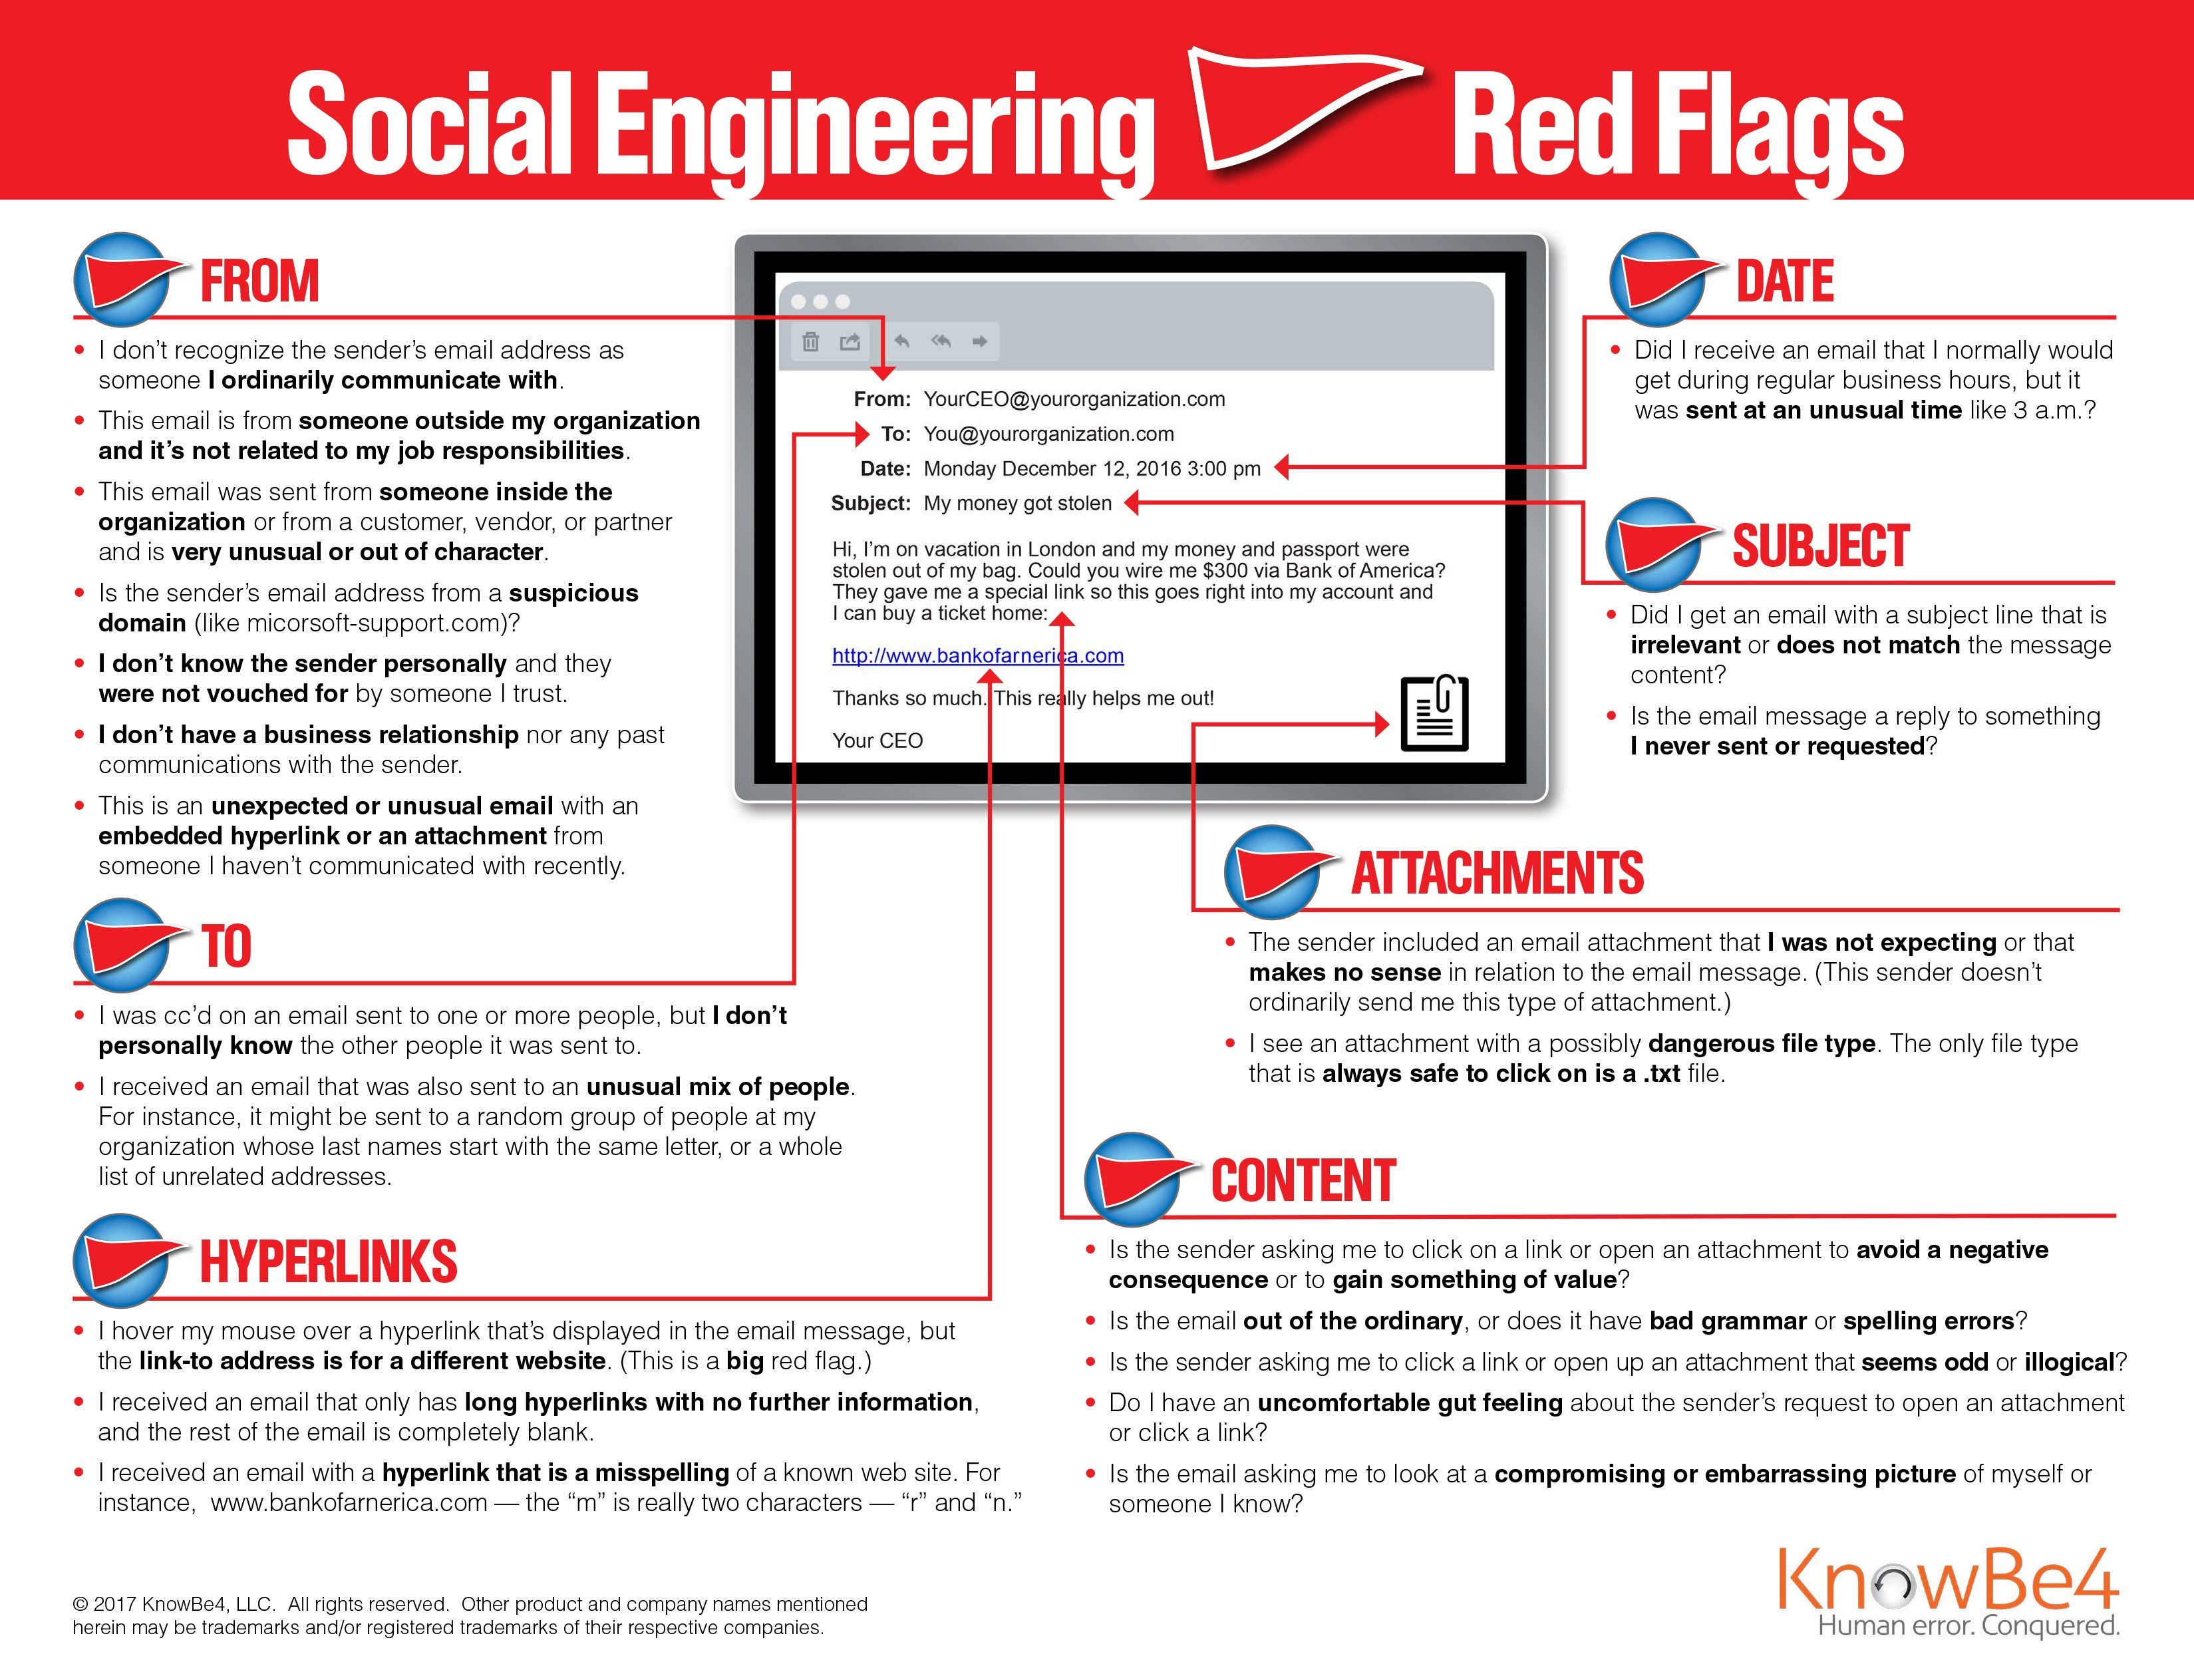 KnowBe4 Red Flags